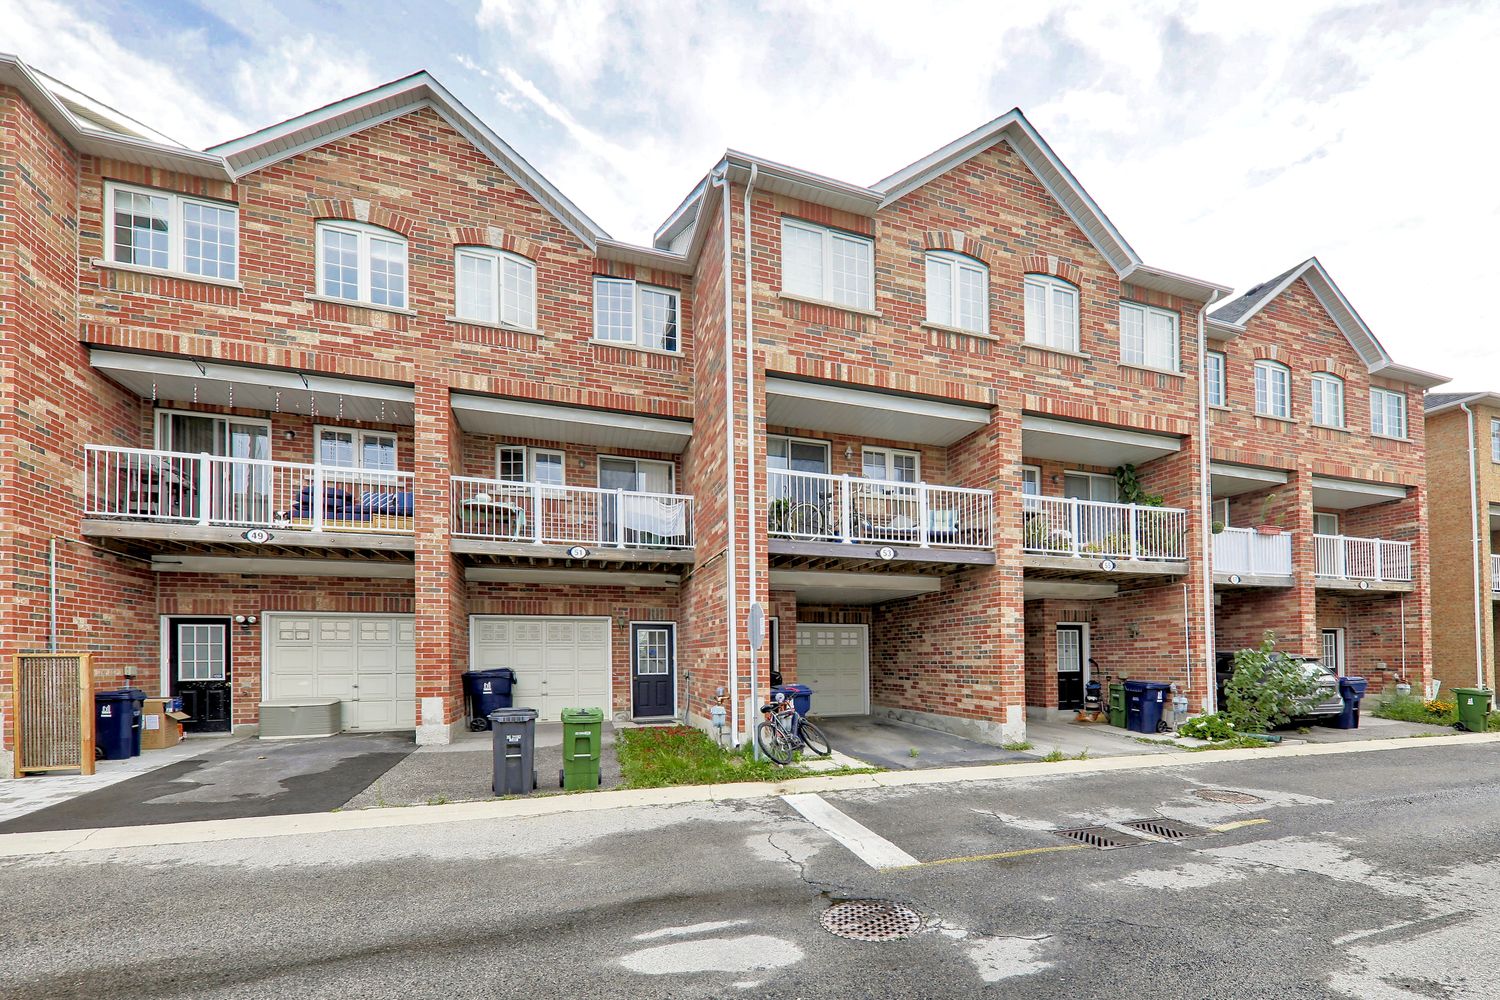 2-96 Birdstone Crescent. Townhomes of St. Clair I is located in  West End, Toronto - image #2 of 4